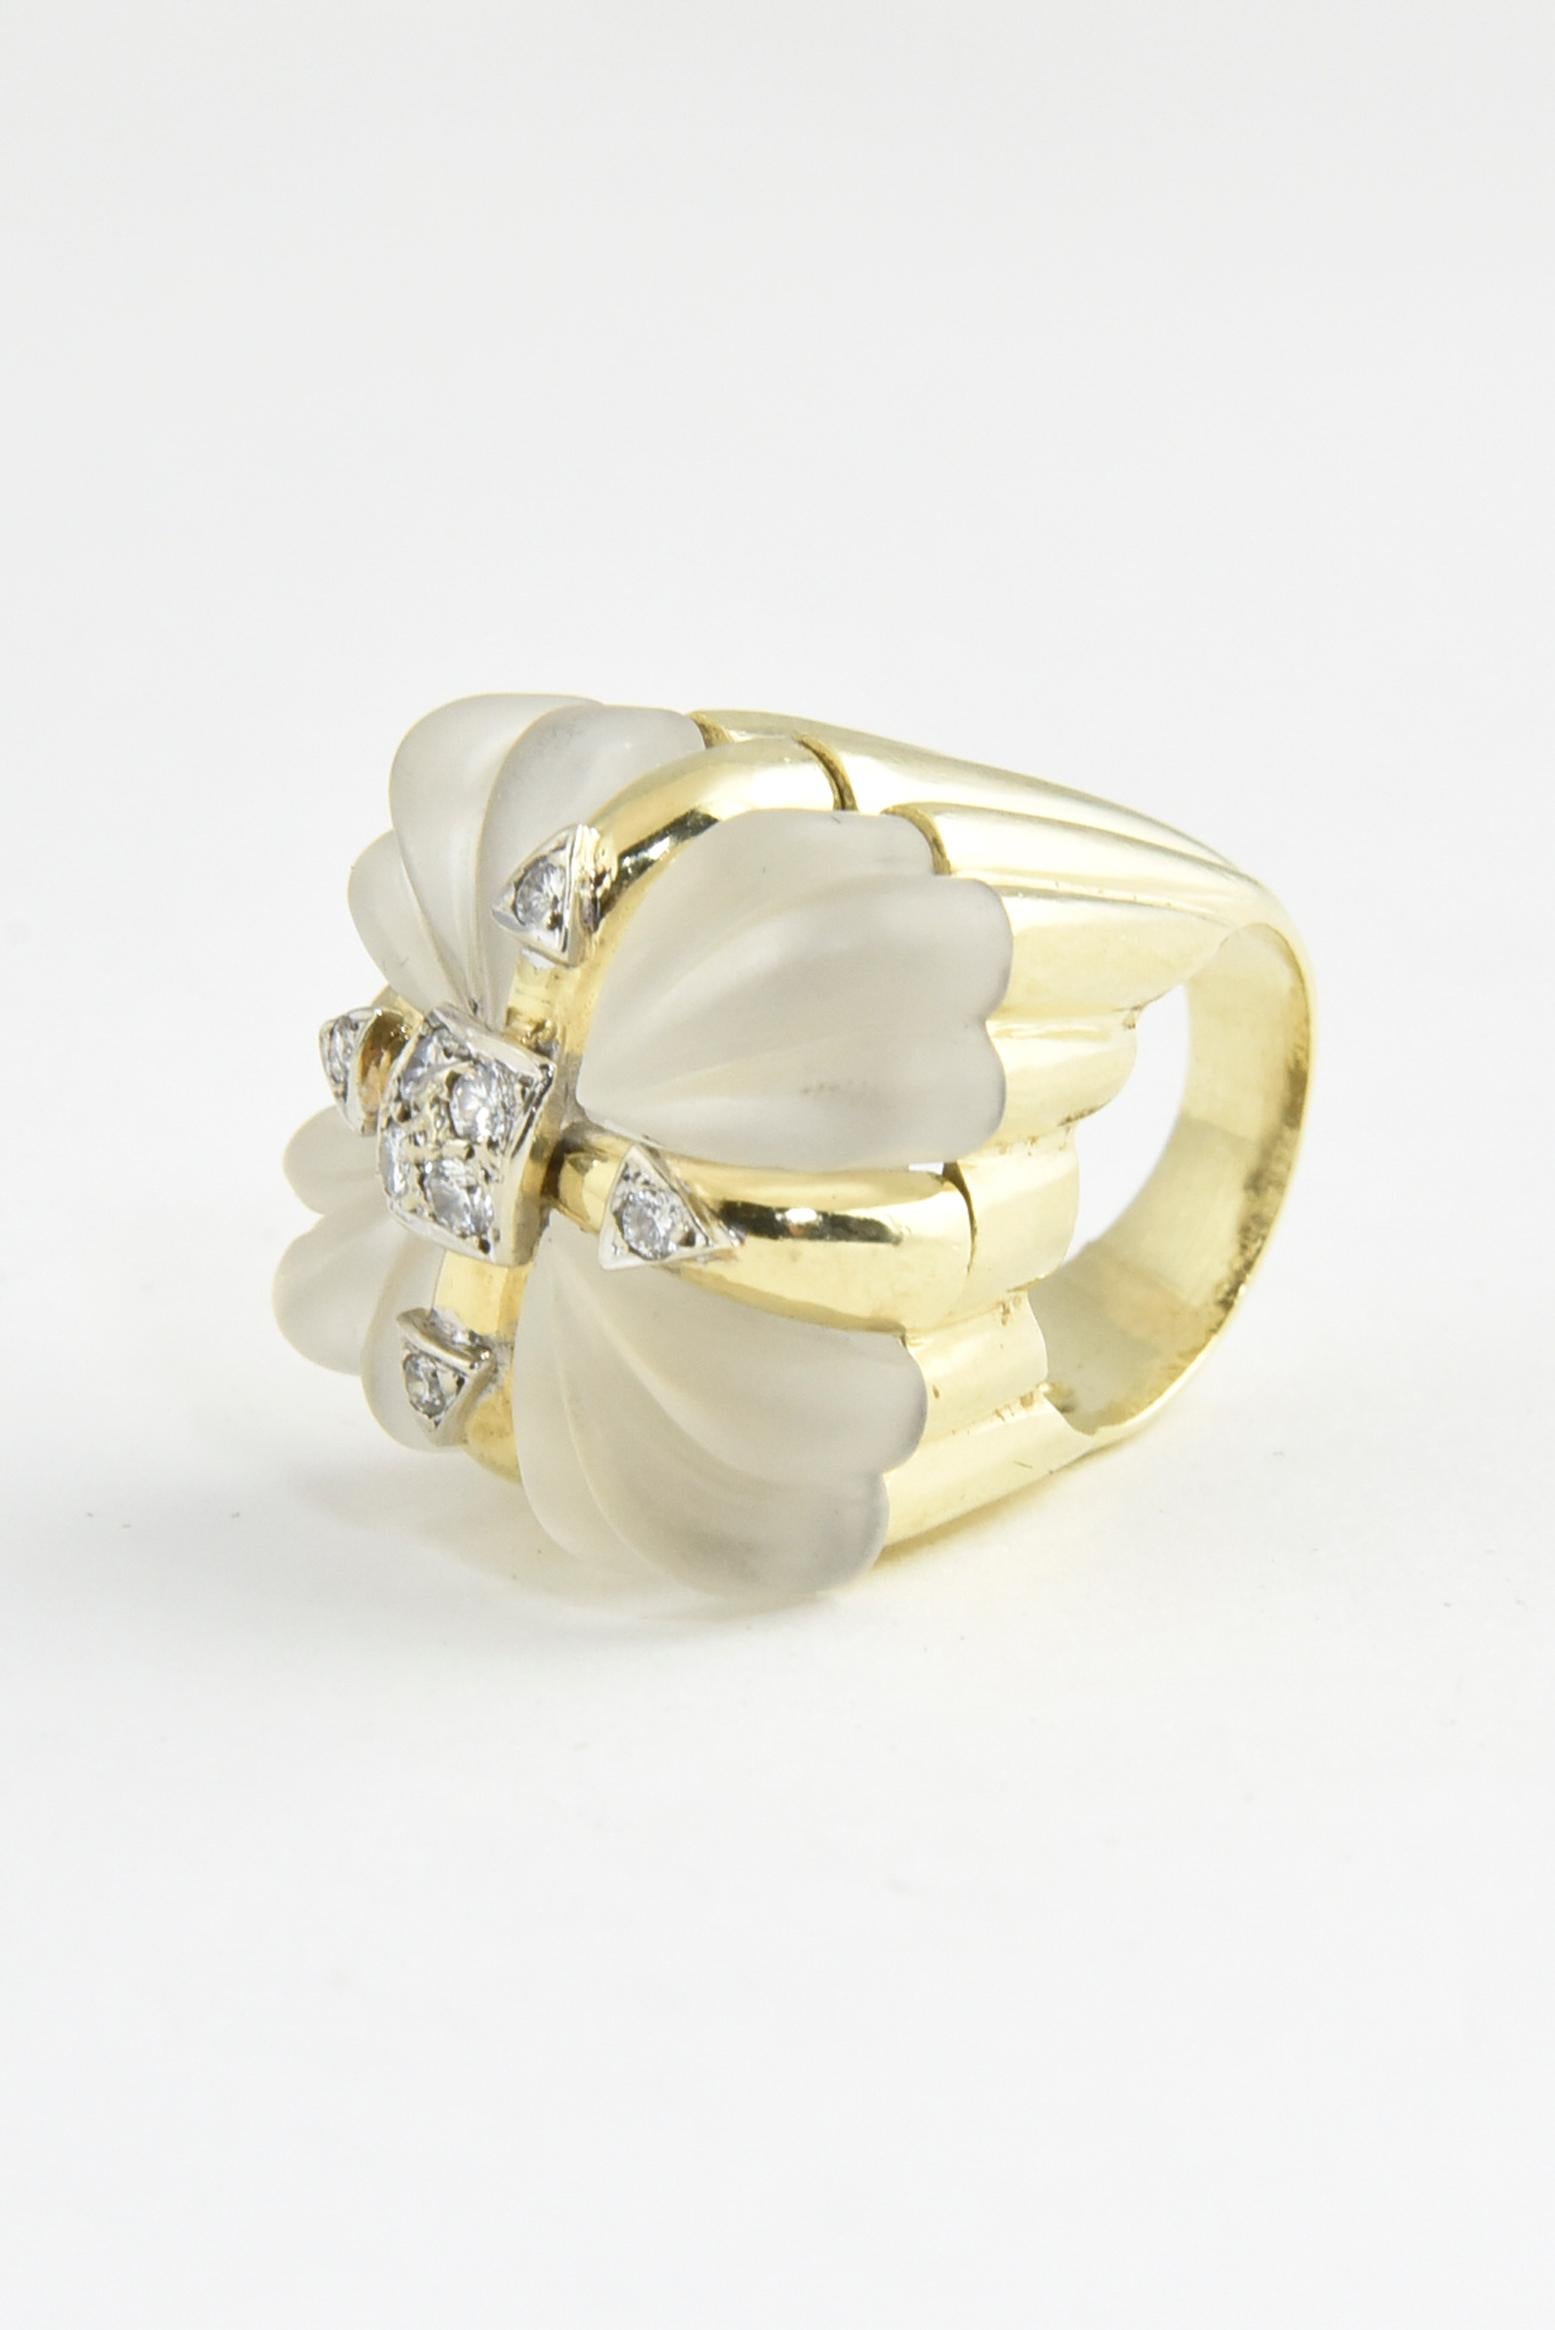 Rock Crystal and Diamond Gold Present Cocktail Ring For Sale 4